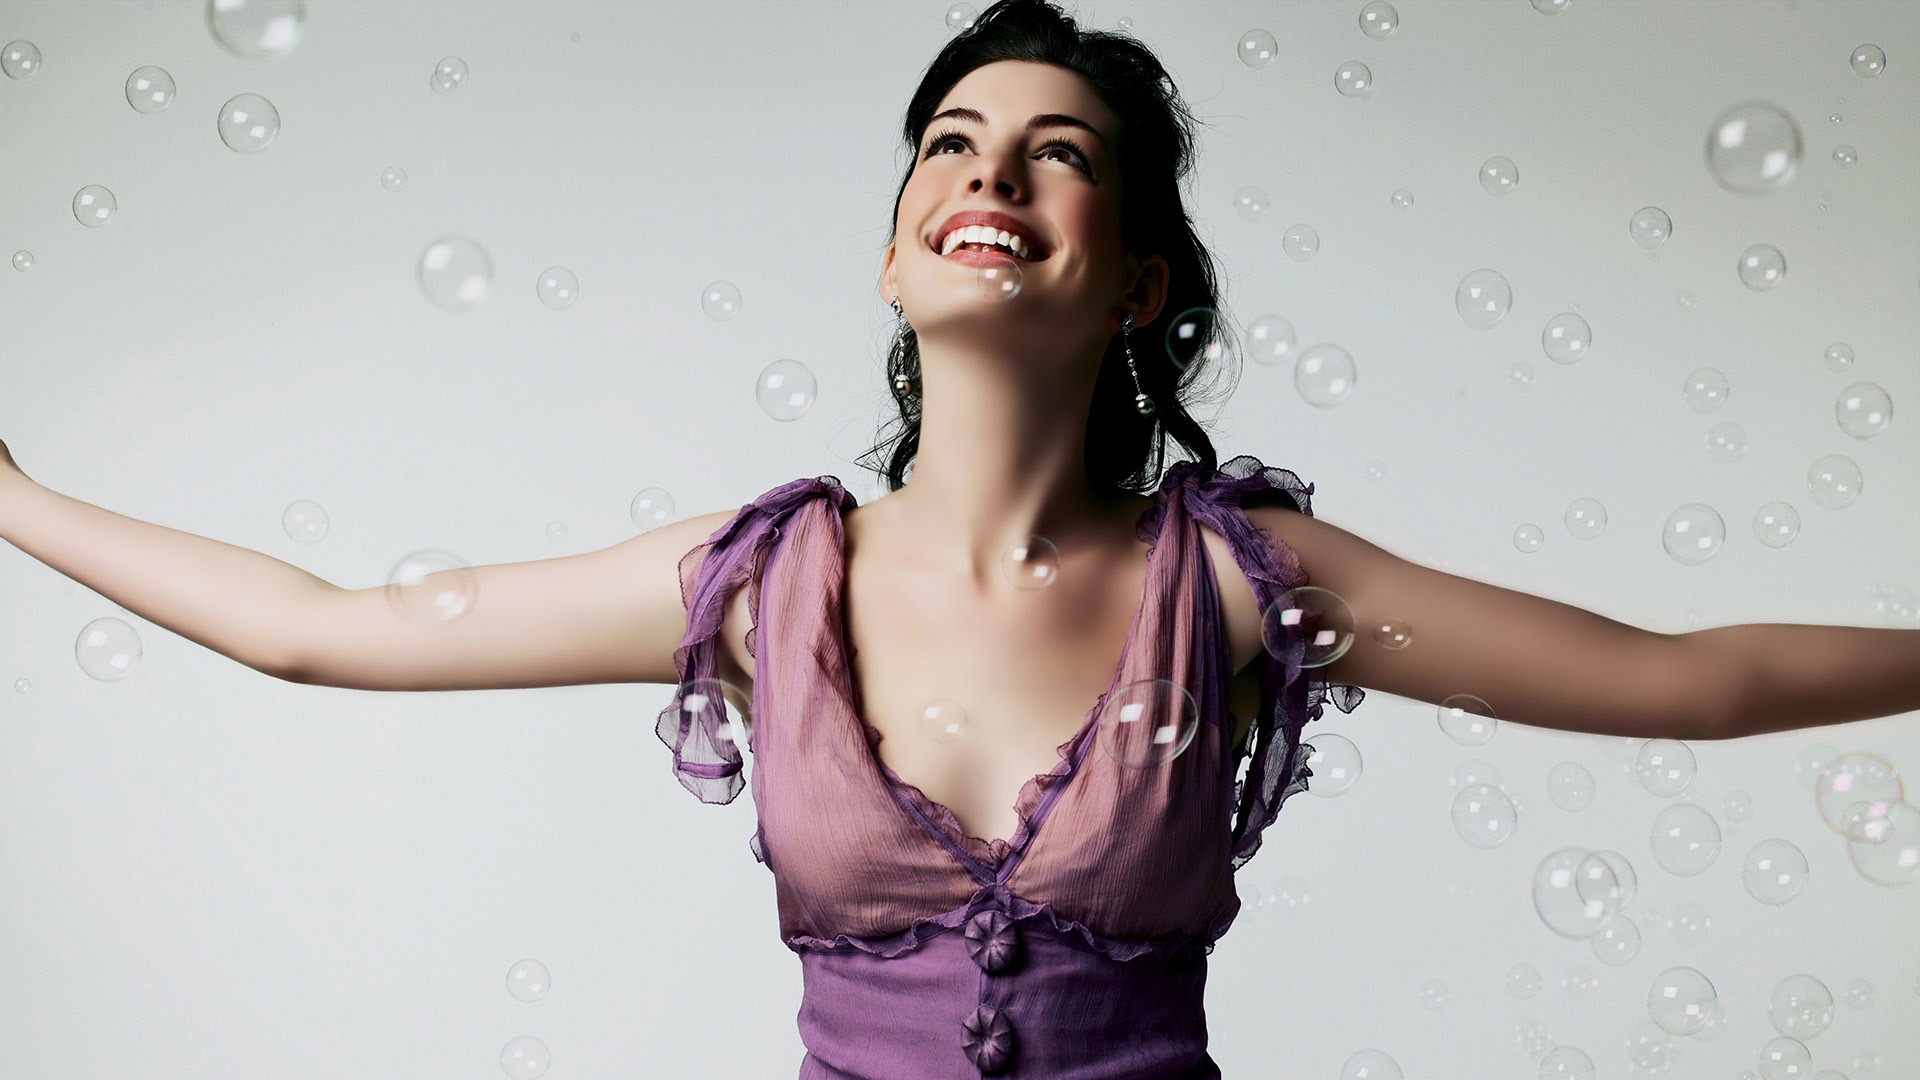 Anne Hathaway Bubbles for 1920 x 1080 HDTV 1080p resolution